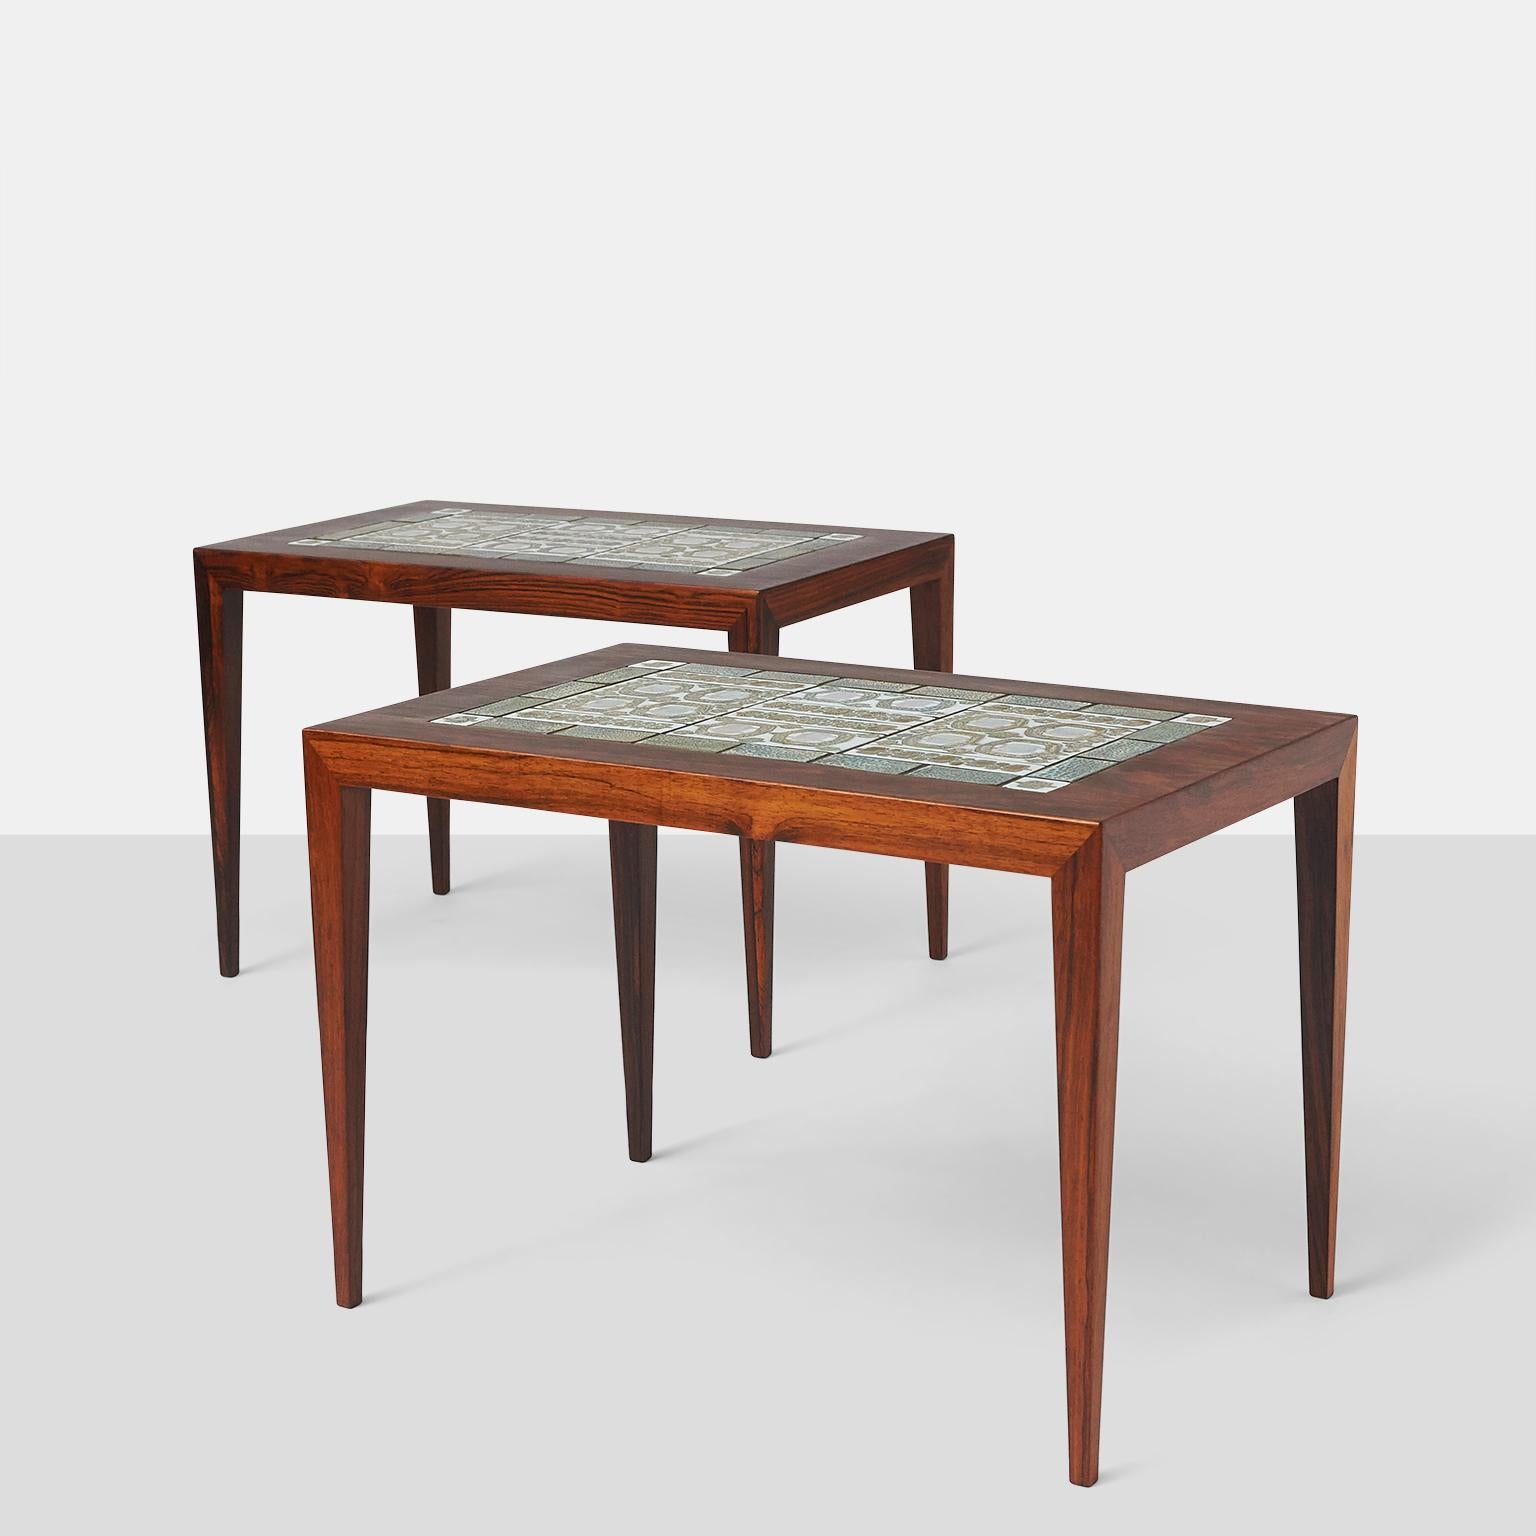 A pair of end tables in rosewood with inset ceramic tiles. Manufactured by Haslev Mobelfabrik, the tables were designed by Severin Hansen Jr and the tiles by Nils Thorsson.